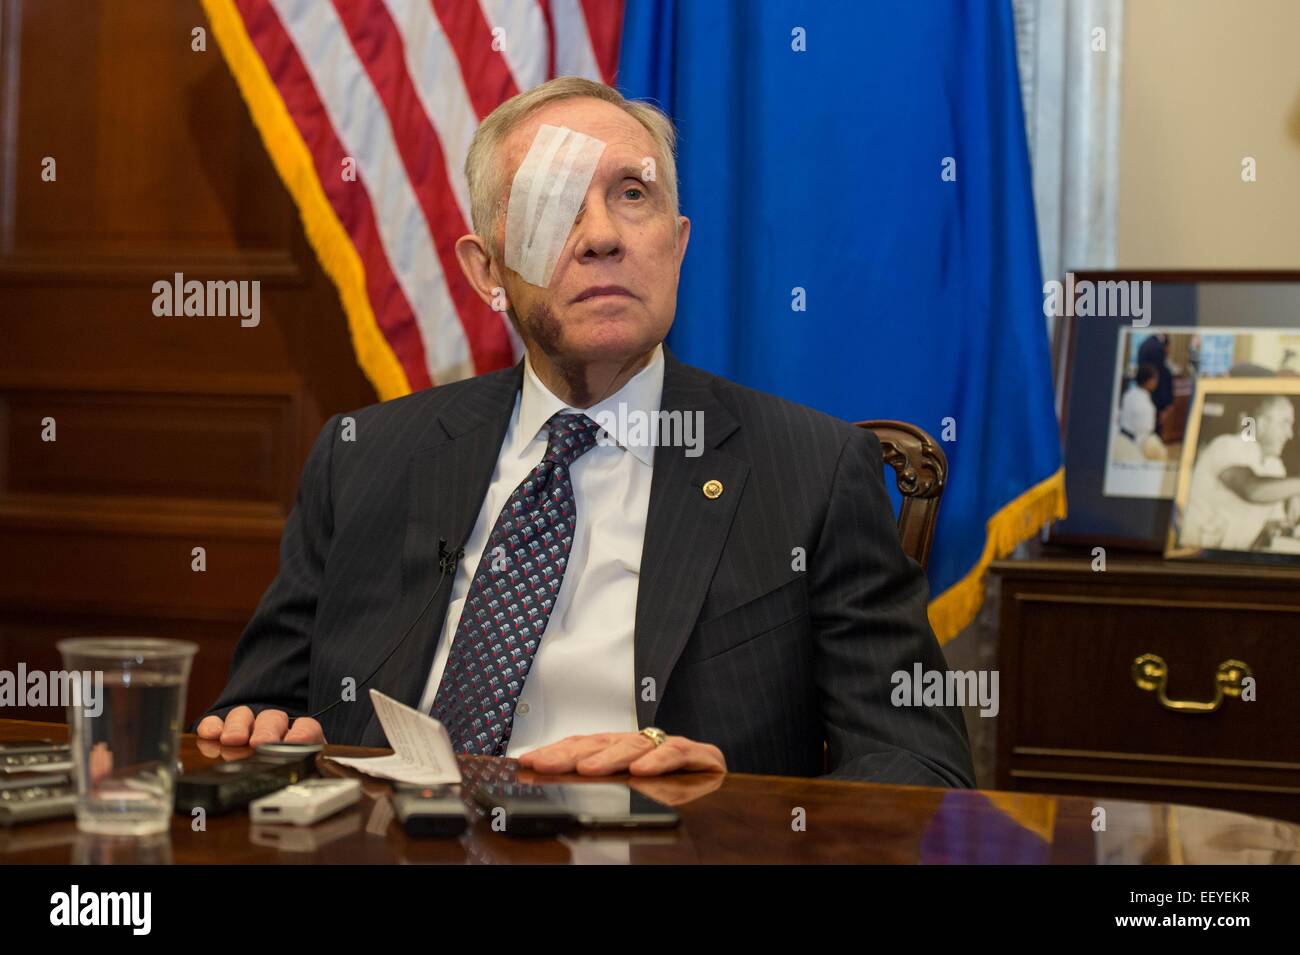 US Democratic Senate Leader Harry Reid with a patch over his injured eye holds his weekly press conference January 22, 2015 in Washington, DC. The 75-year-old Reid suffered an accident while exercising on New Year's Day resulting in four broken ribs and may leave him permanently blind in one eye. Stock Photo